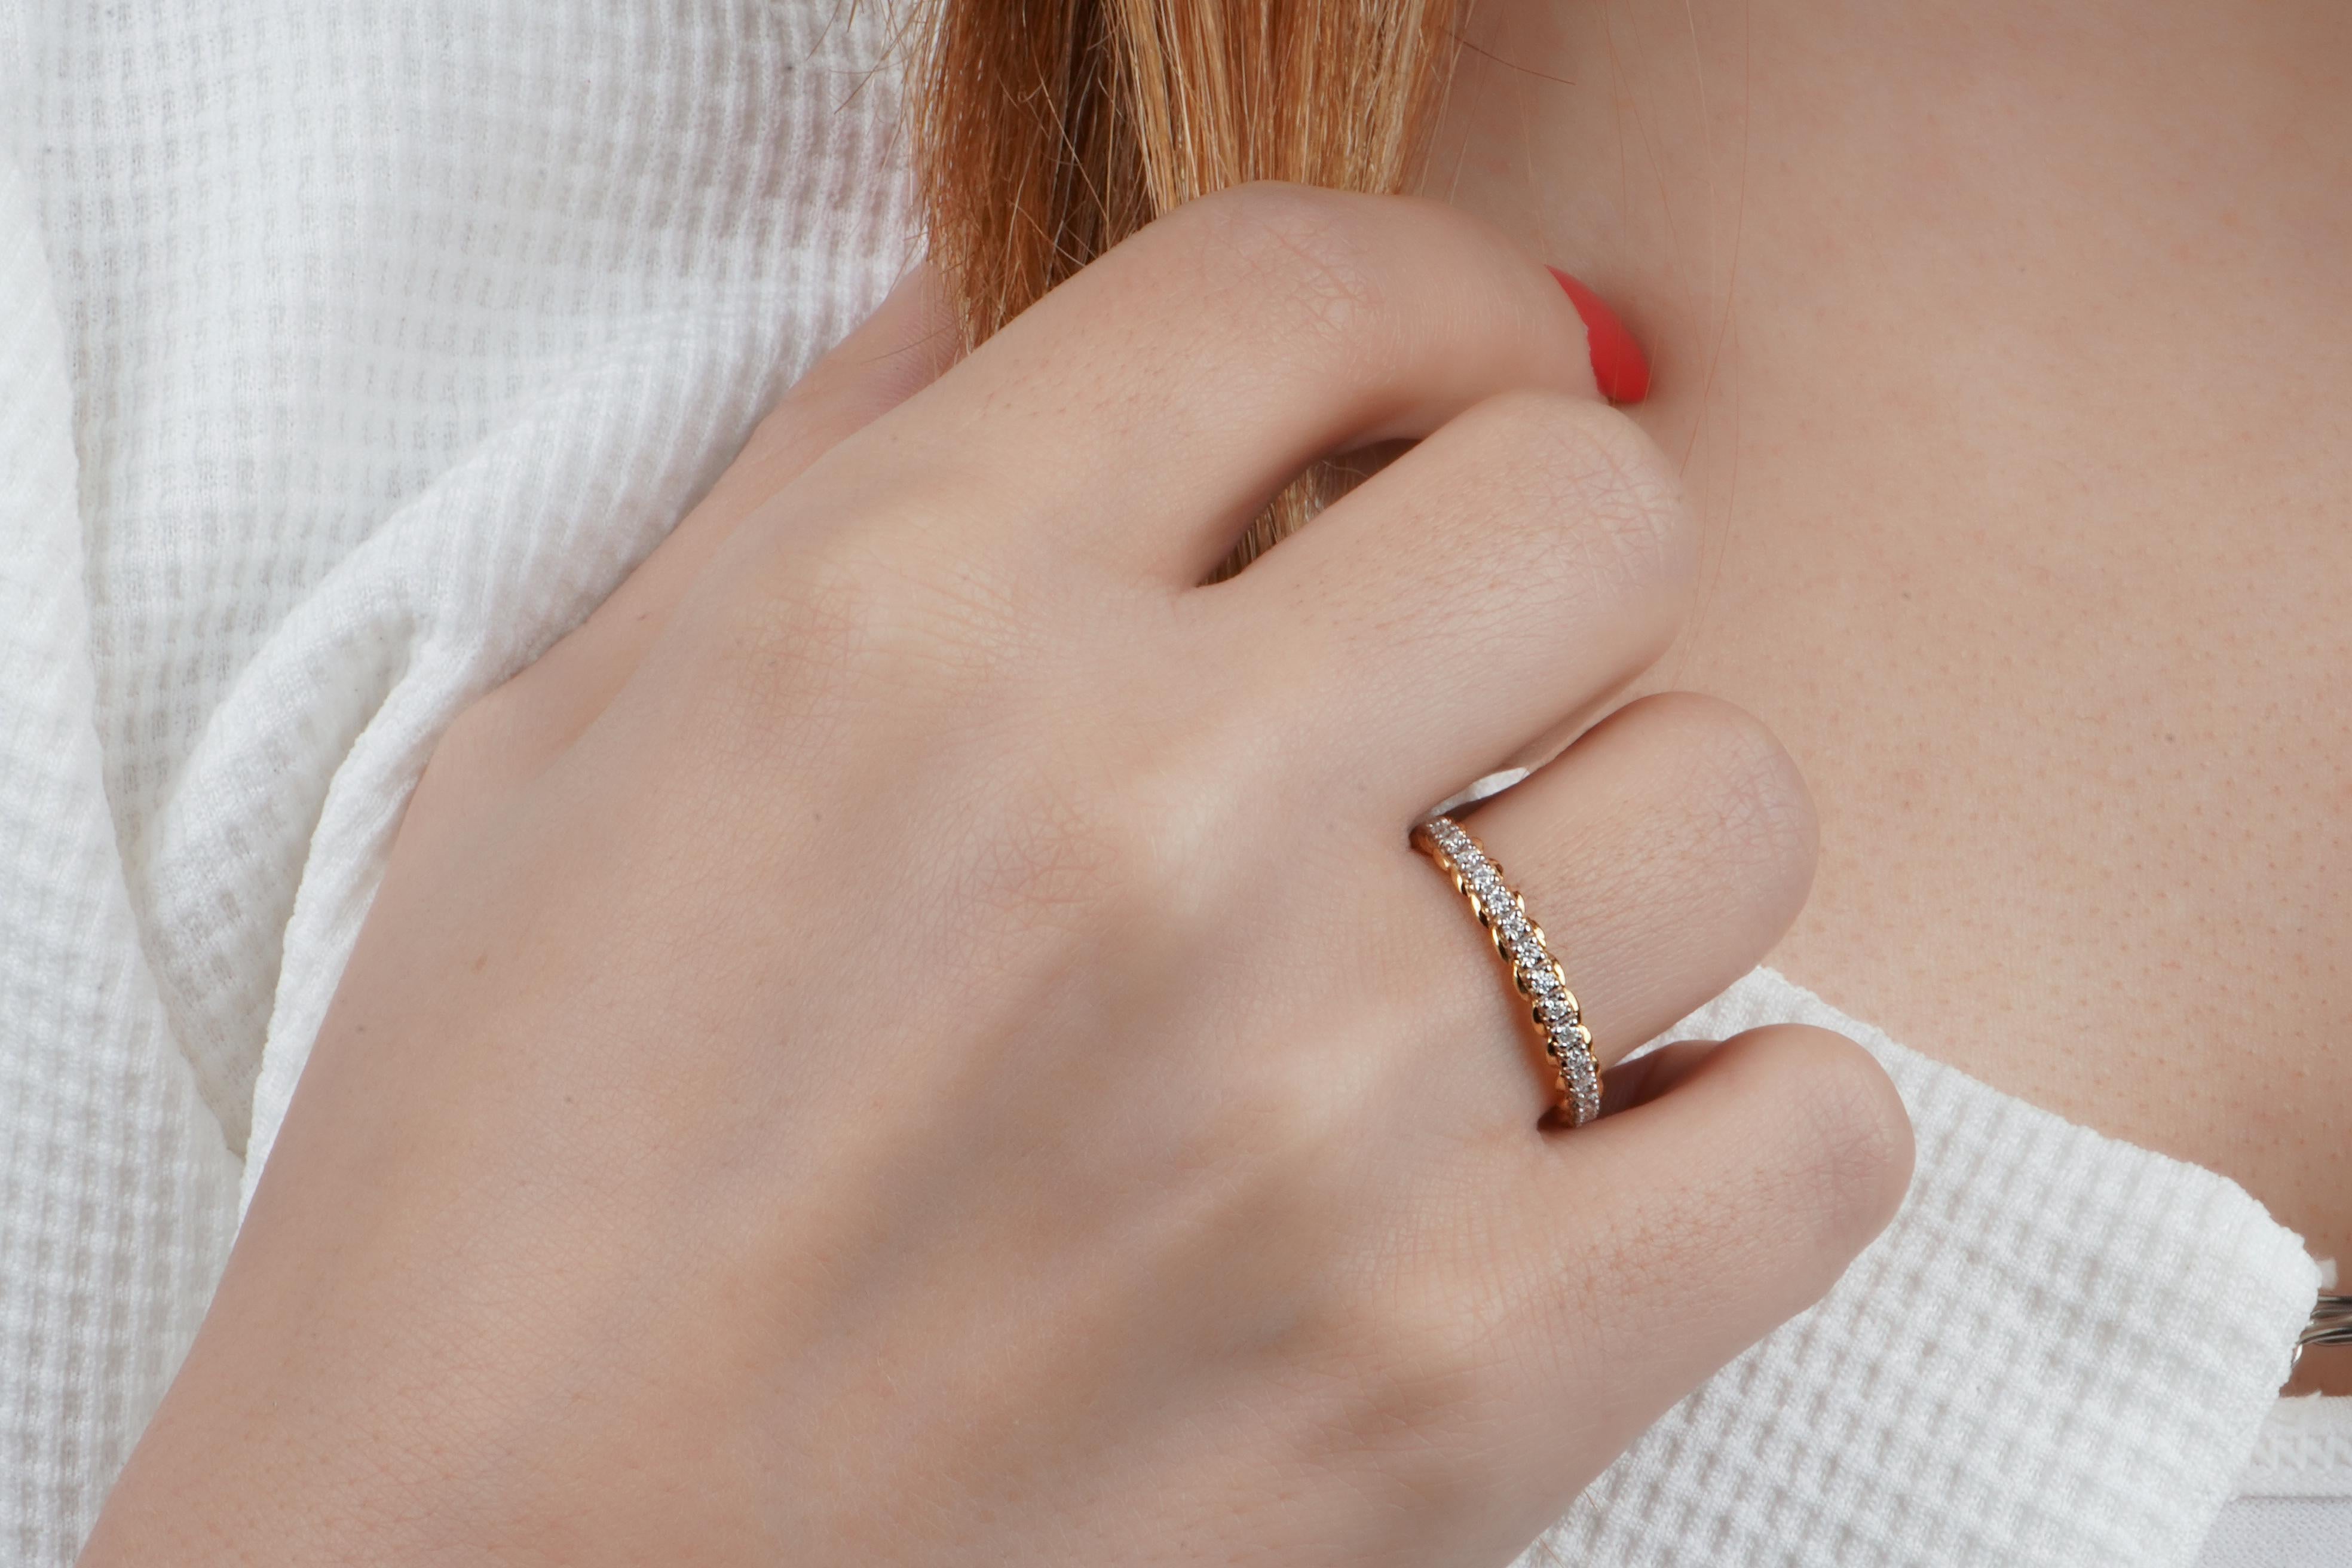 If you are looking for a stunning and unique ring to express your love, look no further than the twisted stack ring. This ring features a beautiful 18k solid gold band that twists around your finger, creating a striking contrast with the sparkling